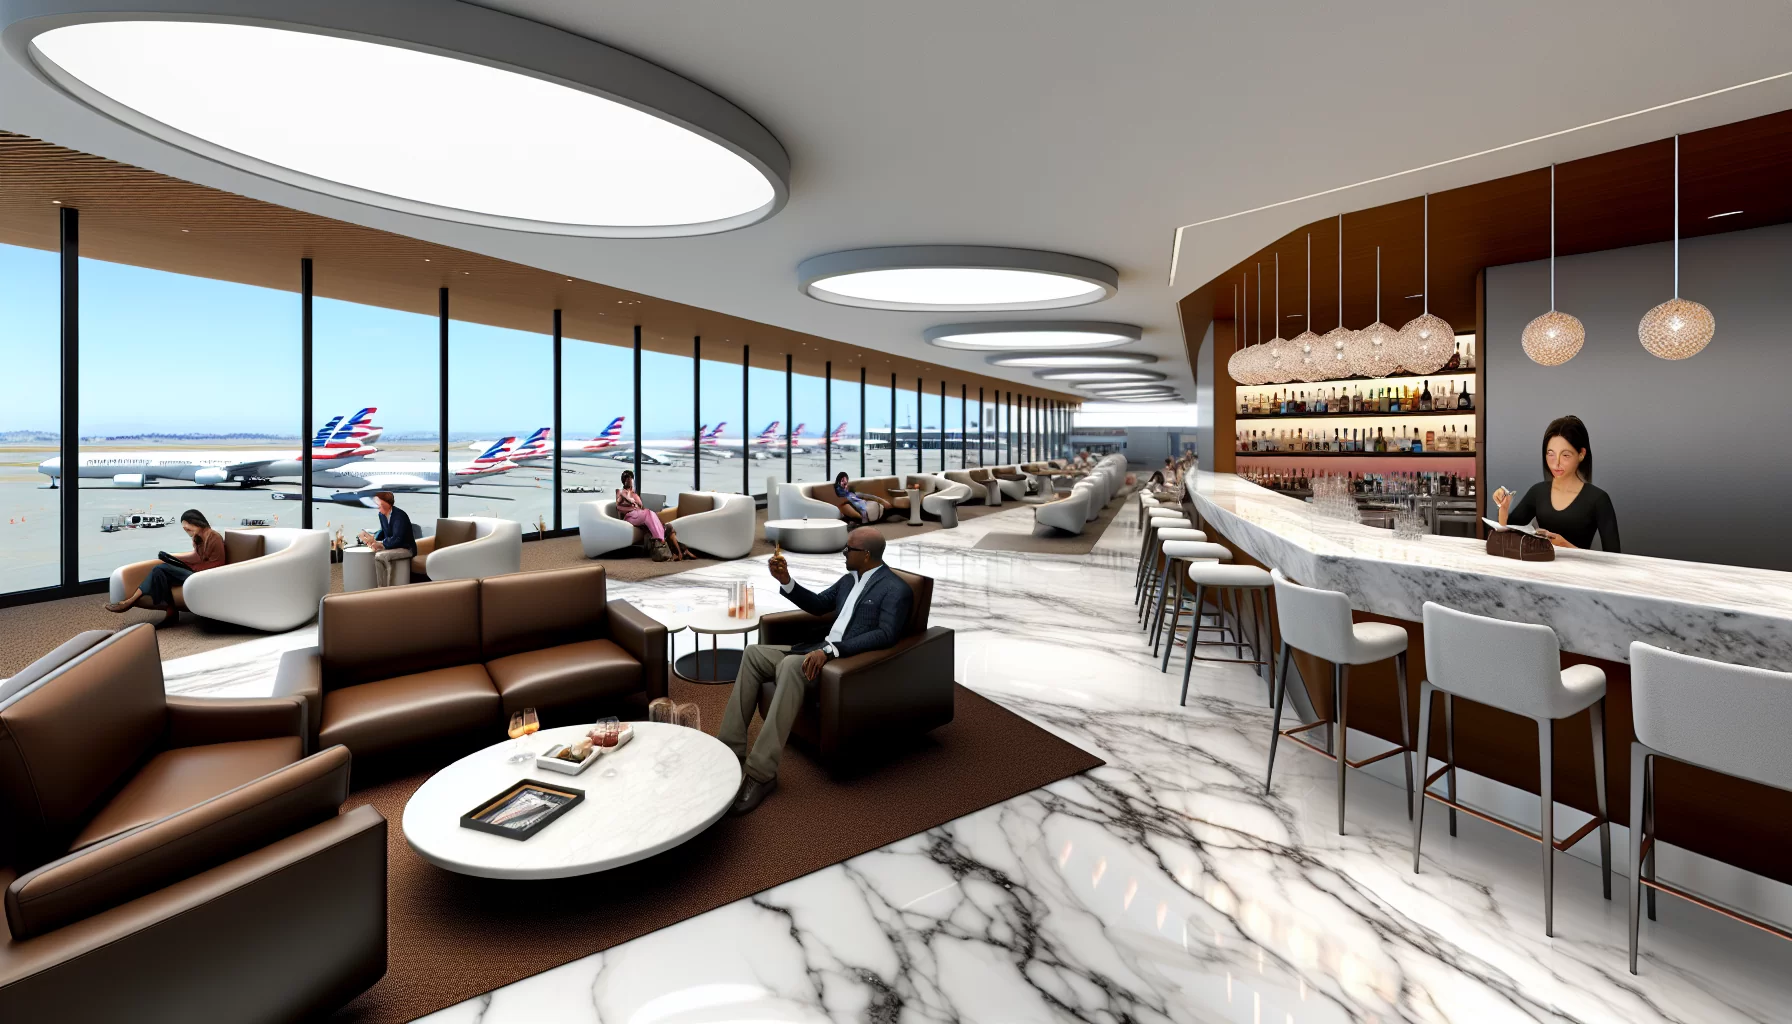 Unveiling the ultimate luxury: new lounge at San Francisco International Airport